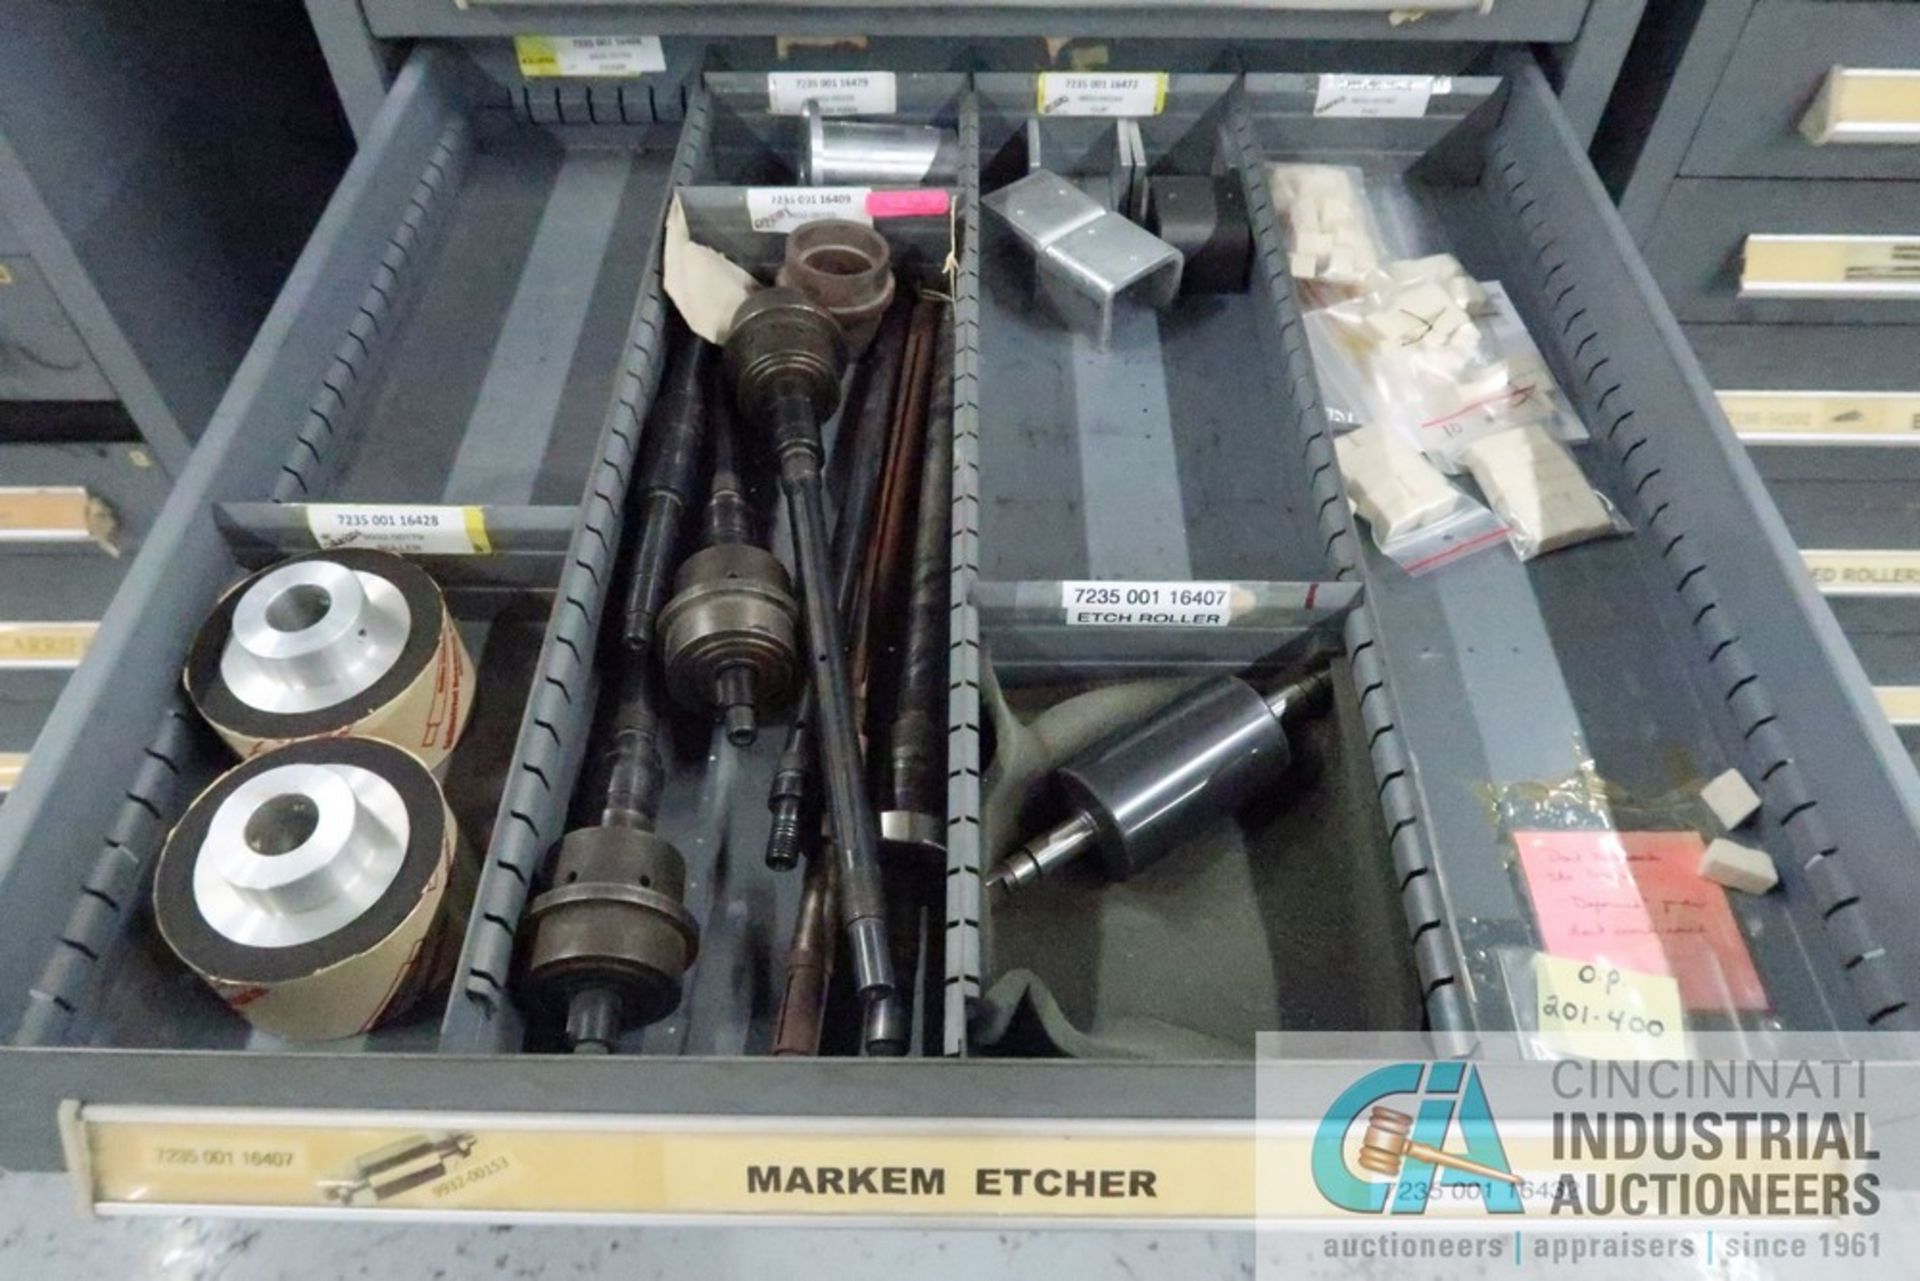 11-DRAWER VIDMAR CABINET WITH CONTENTS INCLUDING MISCELLANEOUS MARKER ETCHER PARTS, KNIVES, - Image 5 of 8